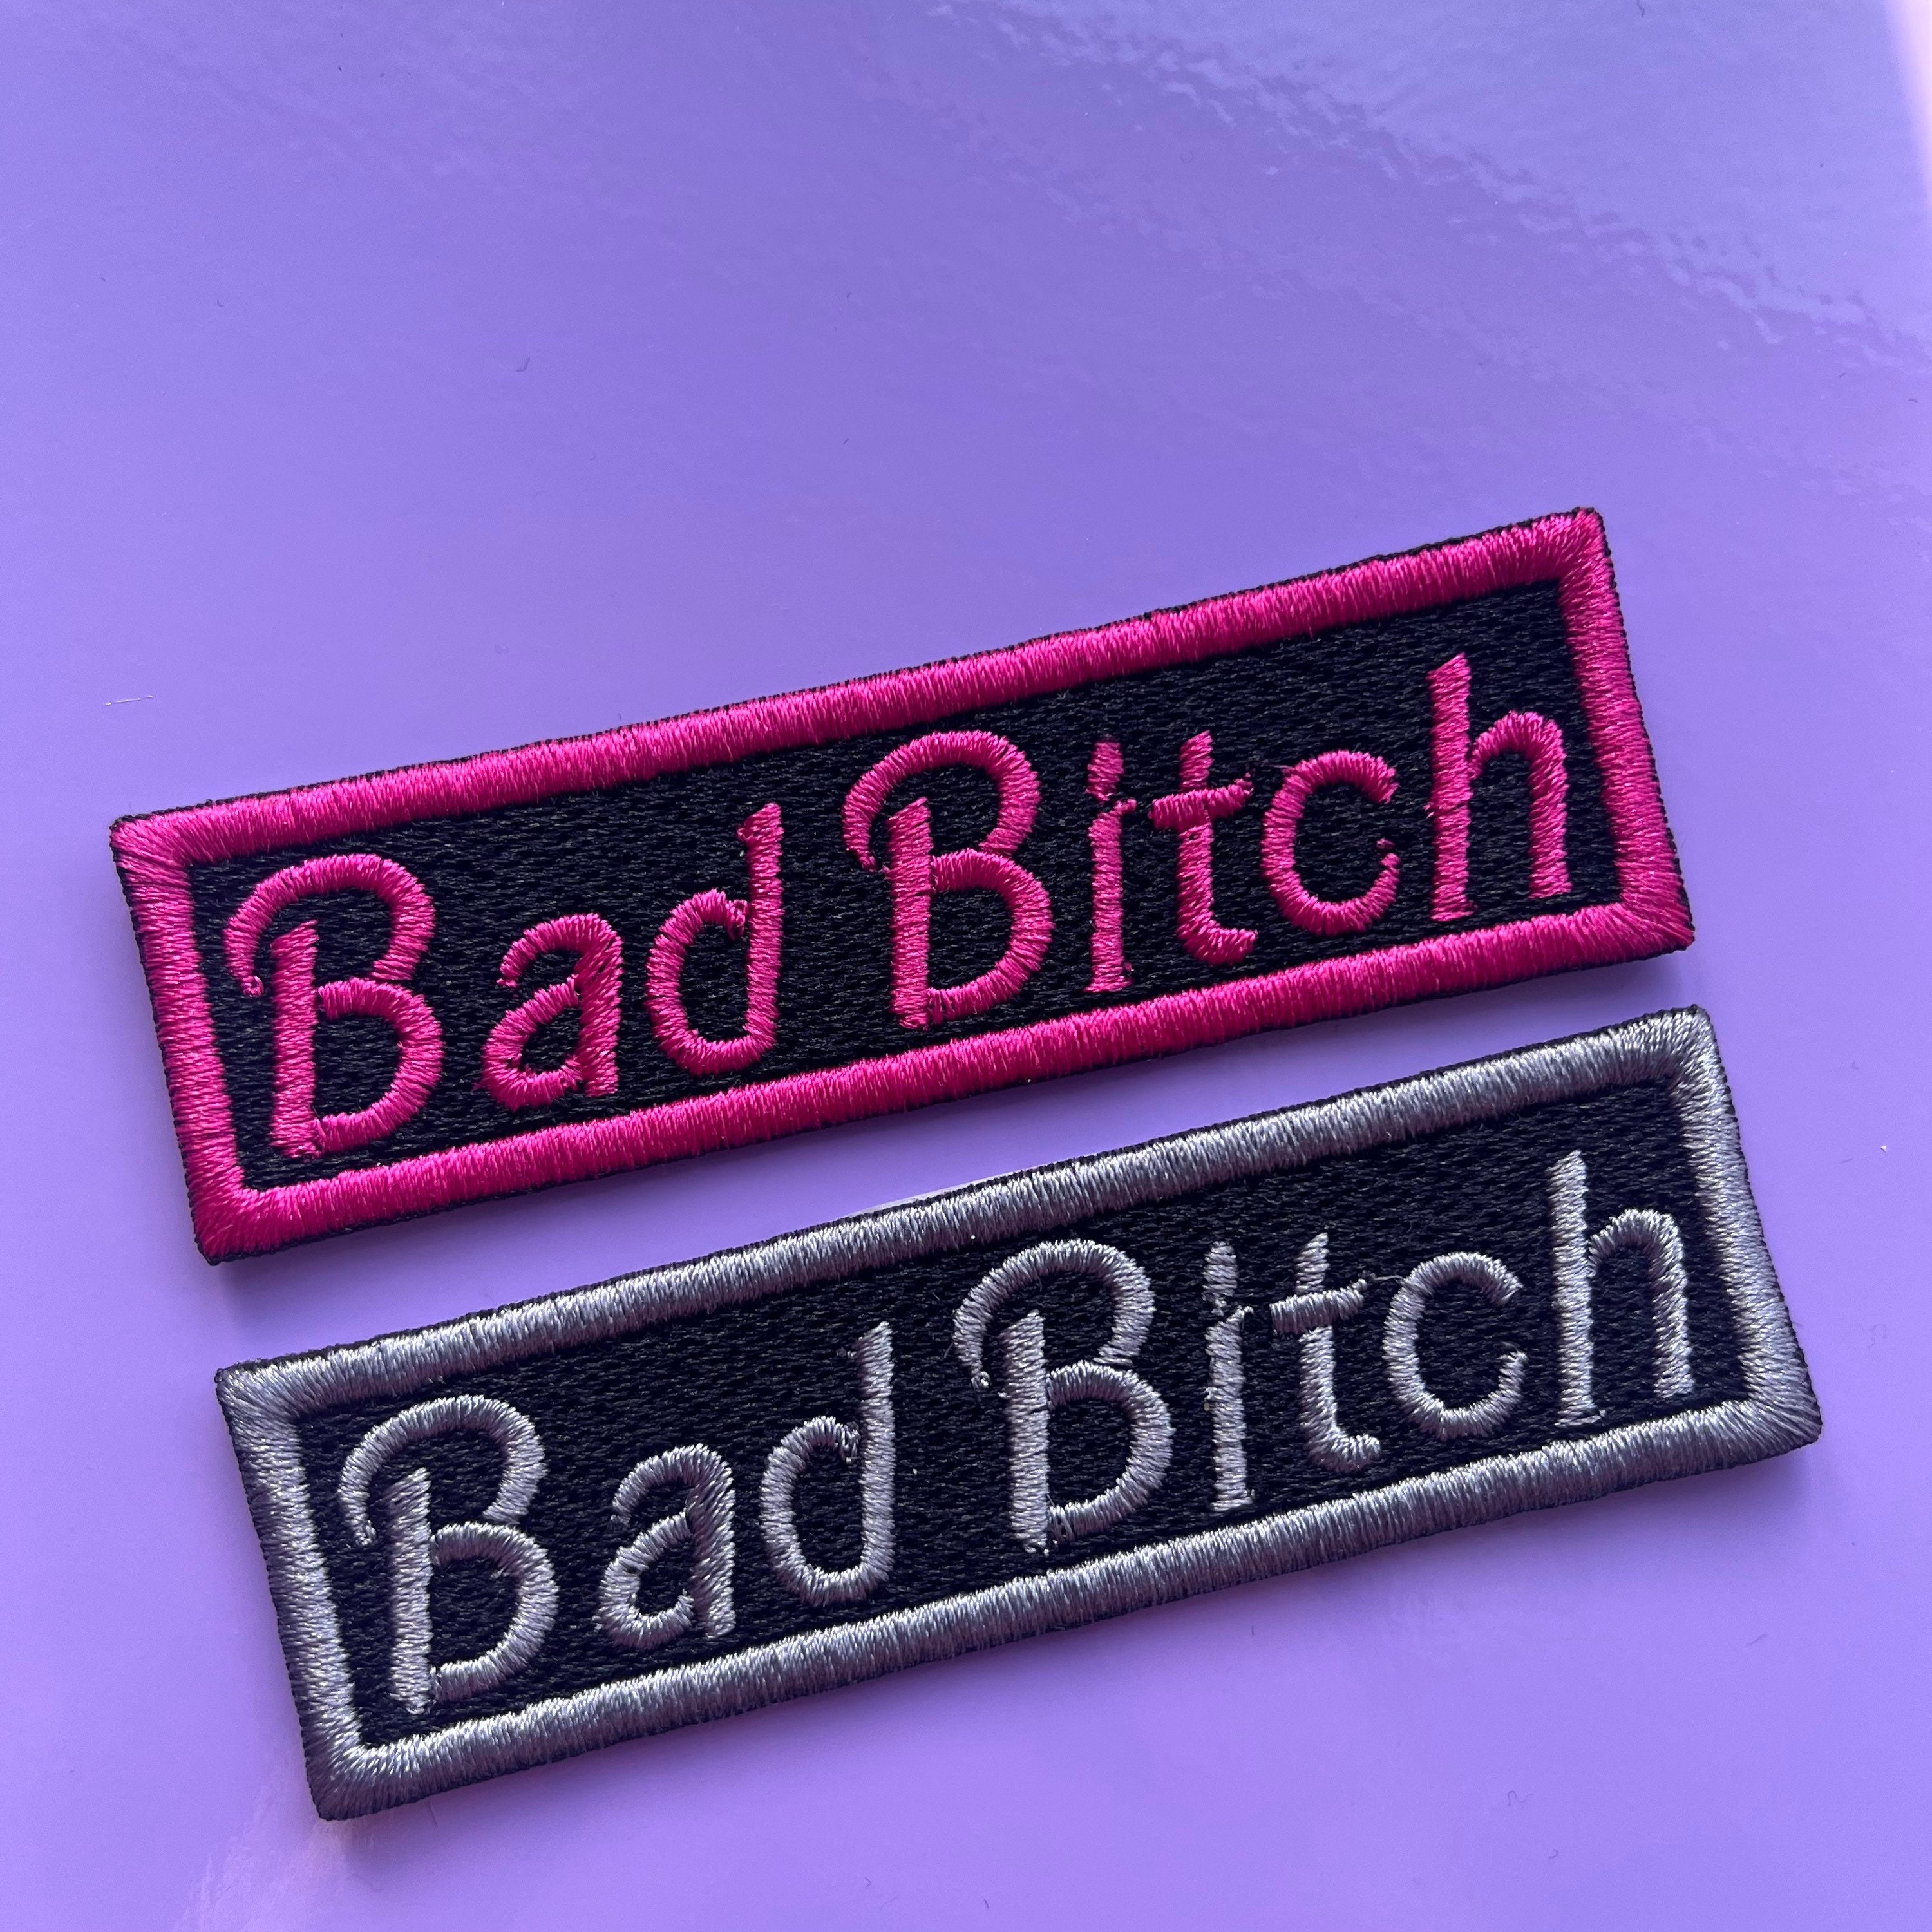 Funny Patches – Rude Patch